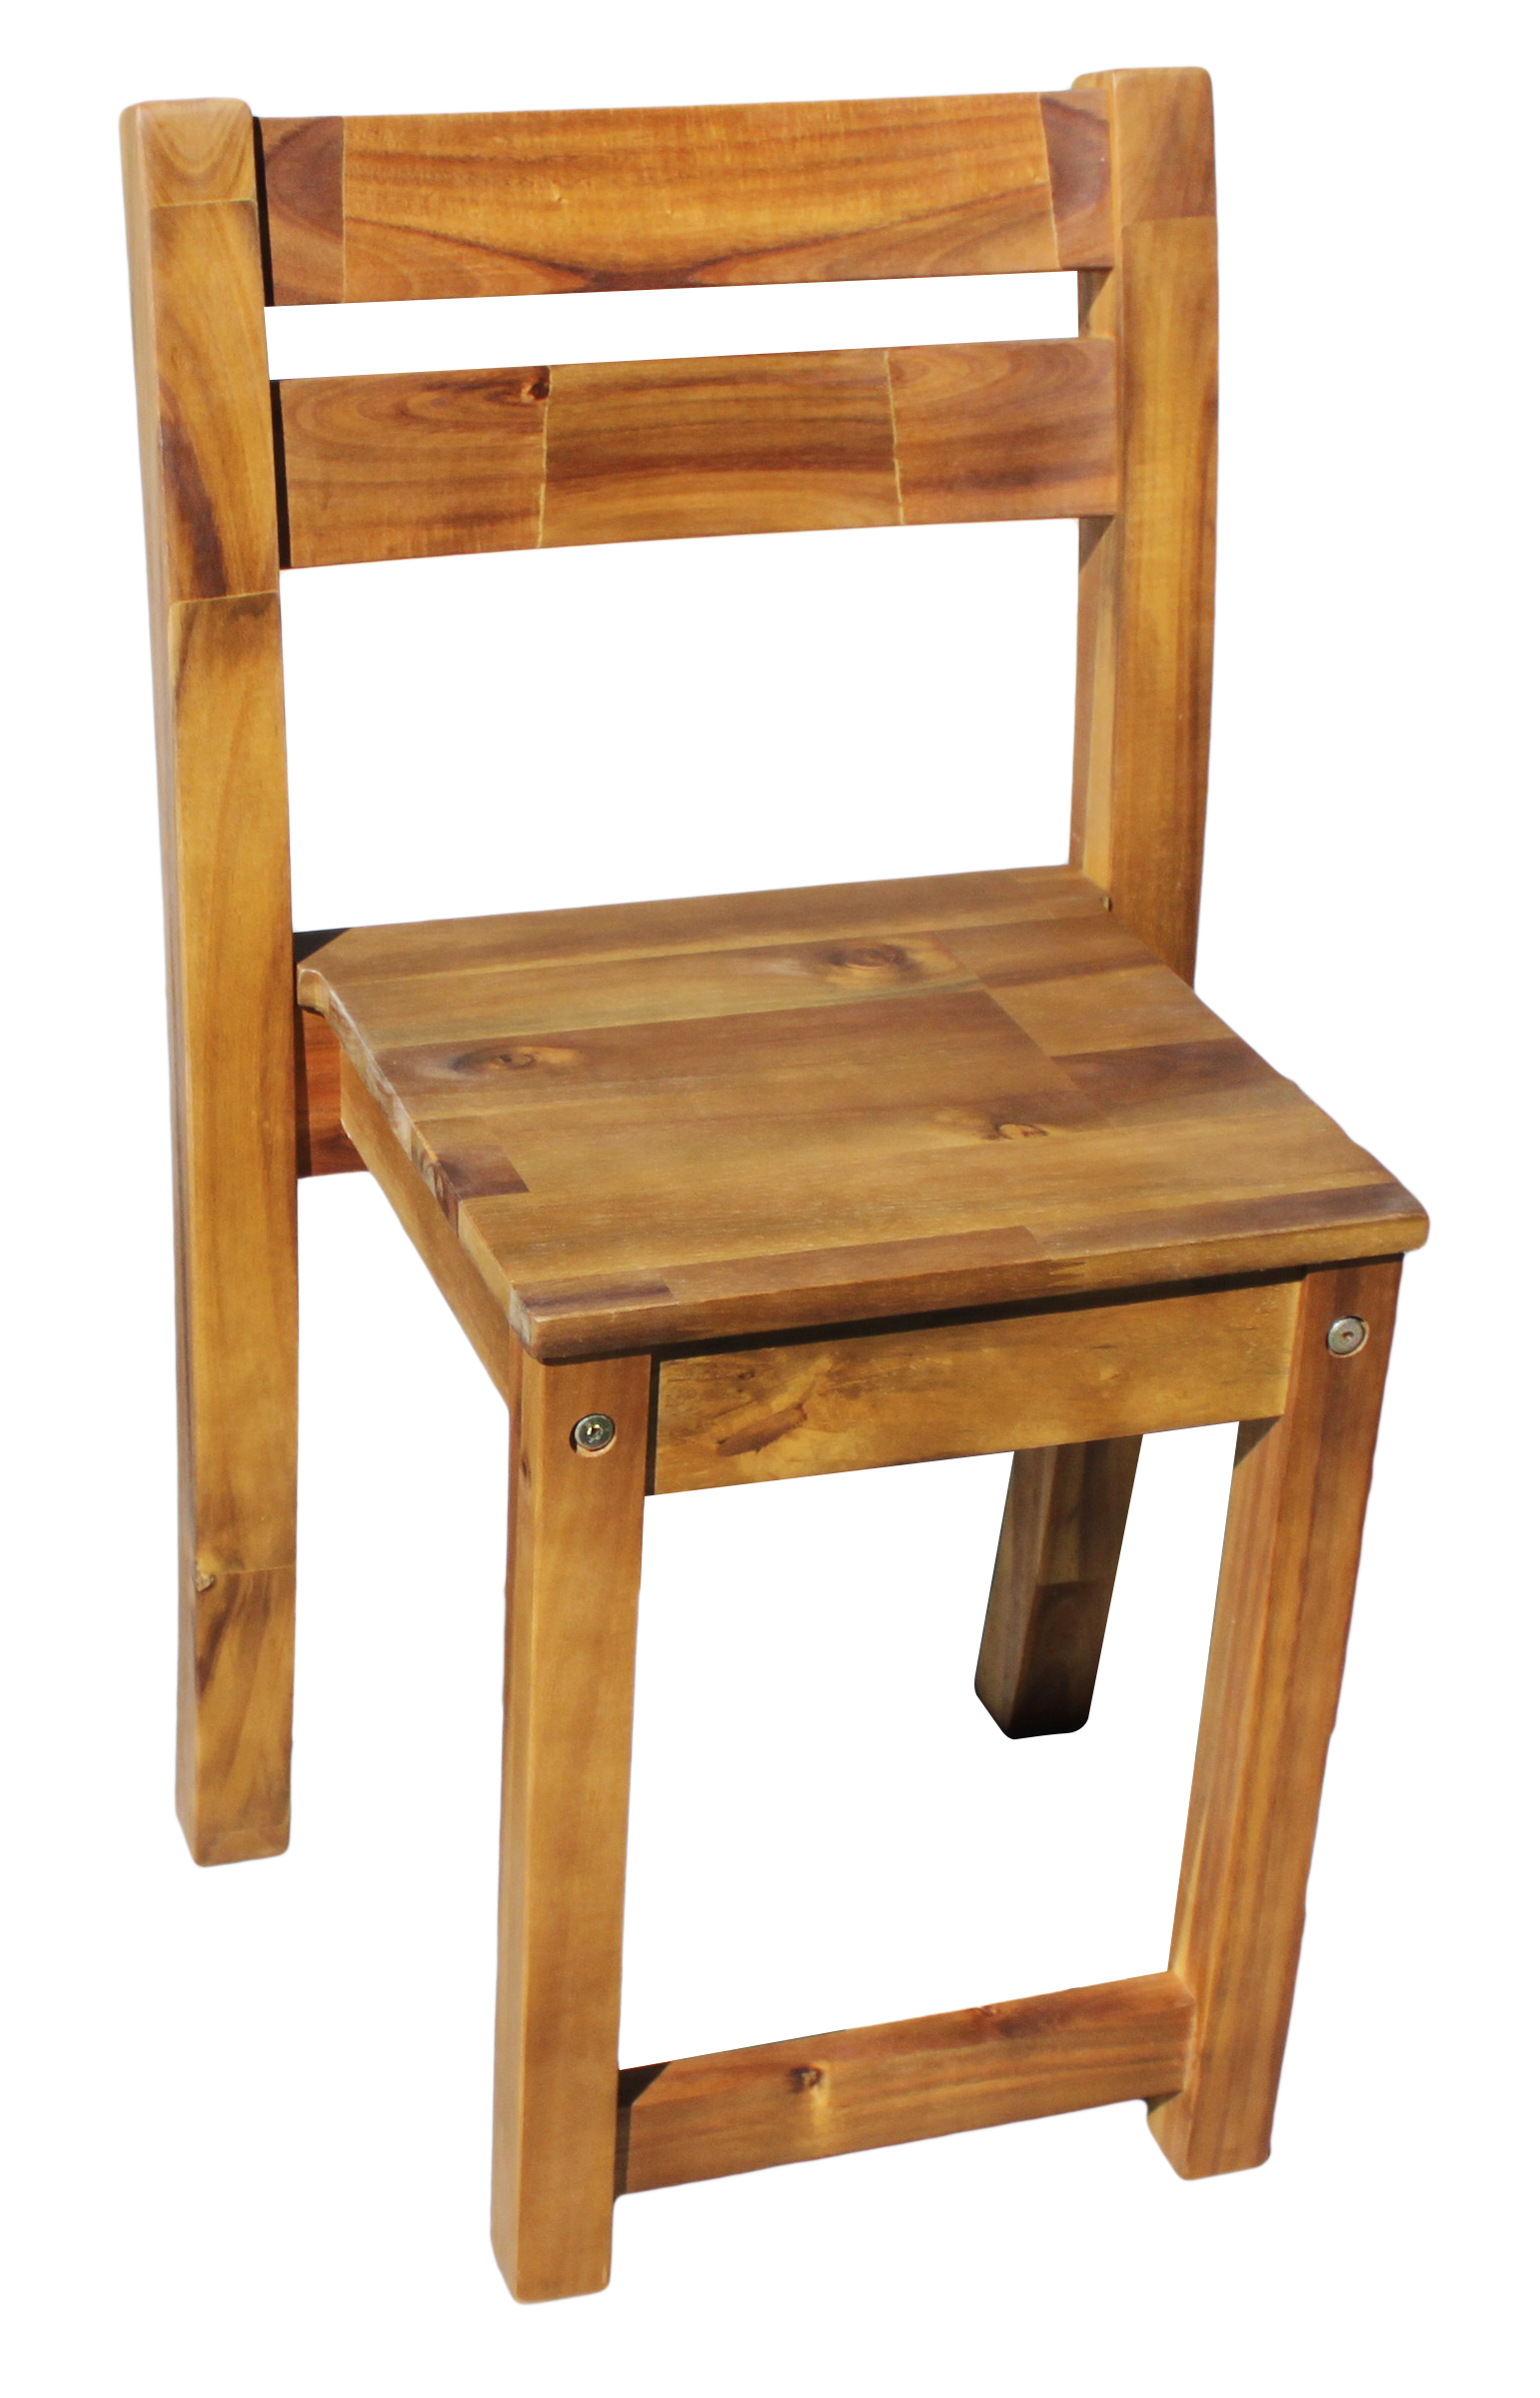 Stacking chair 40 cm high